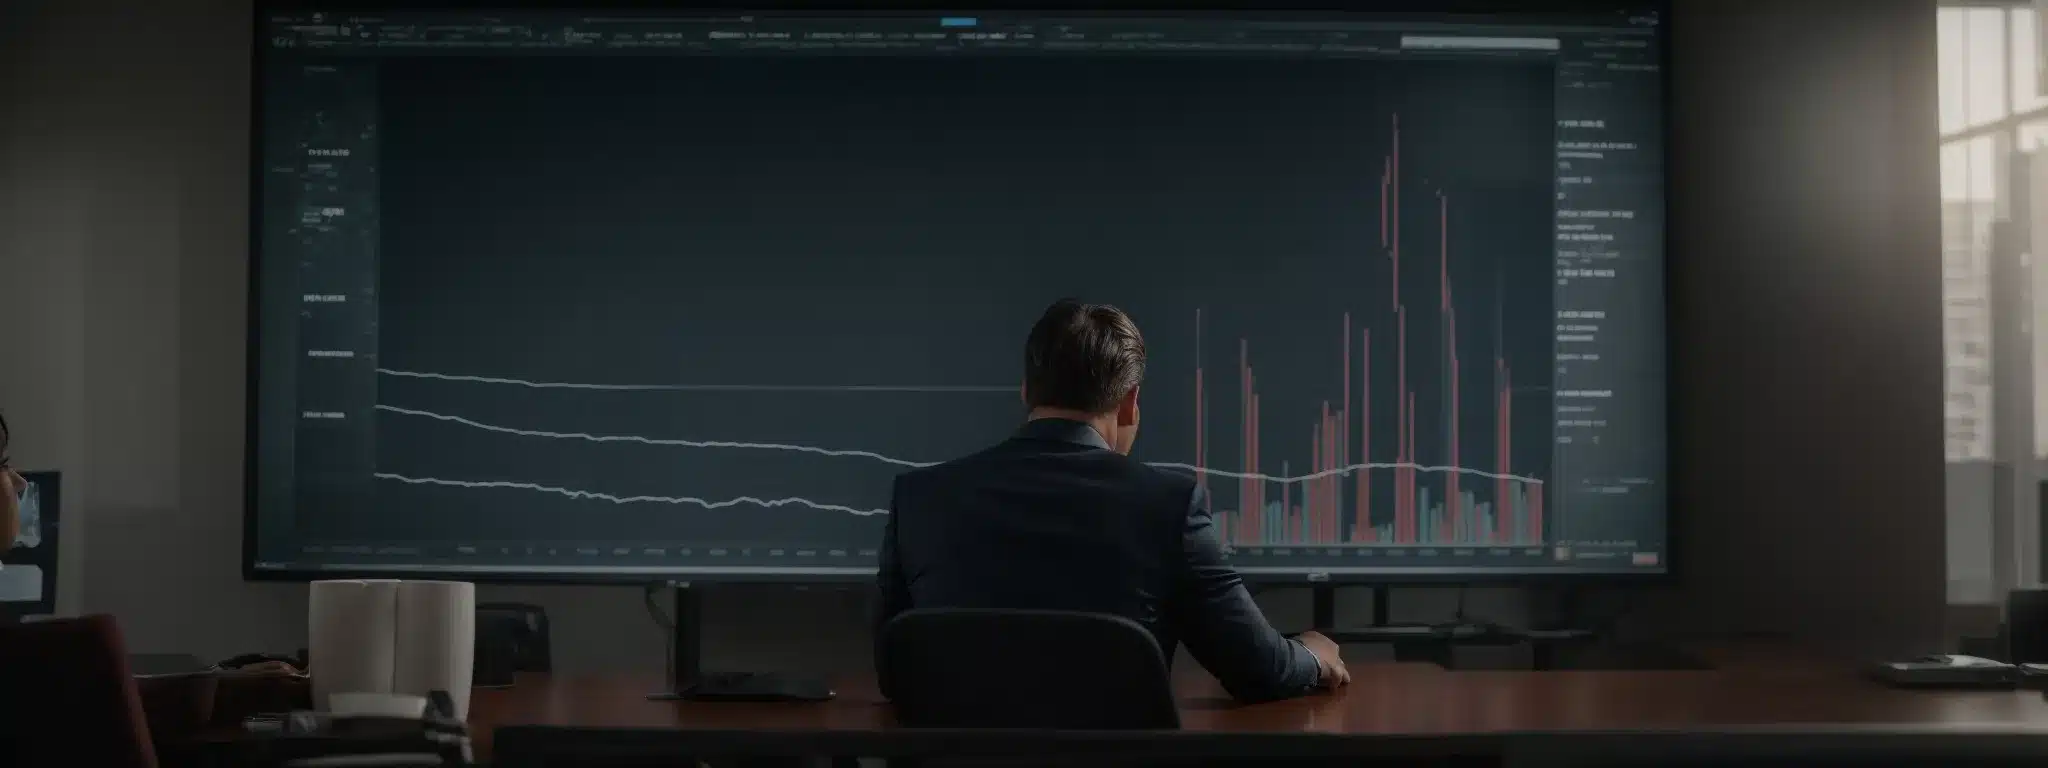 An Executive Reviews A Graph Showing Ascending Market Share Trends On A Large Screen In A Modern Office.